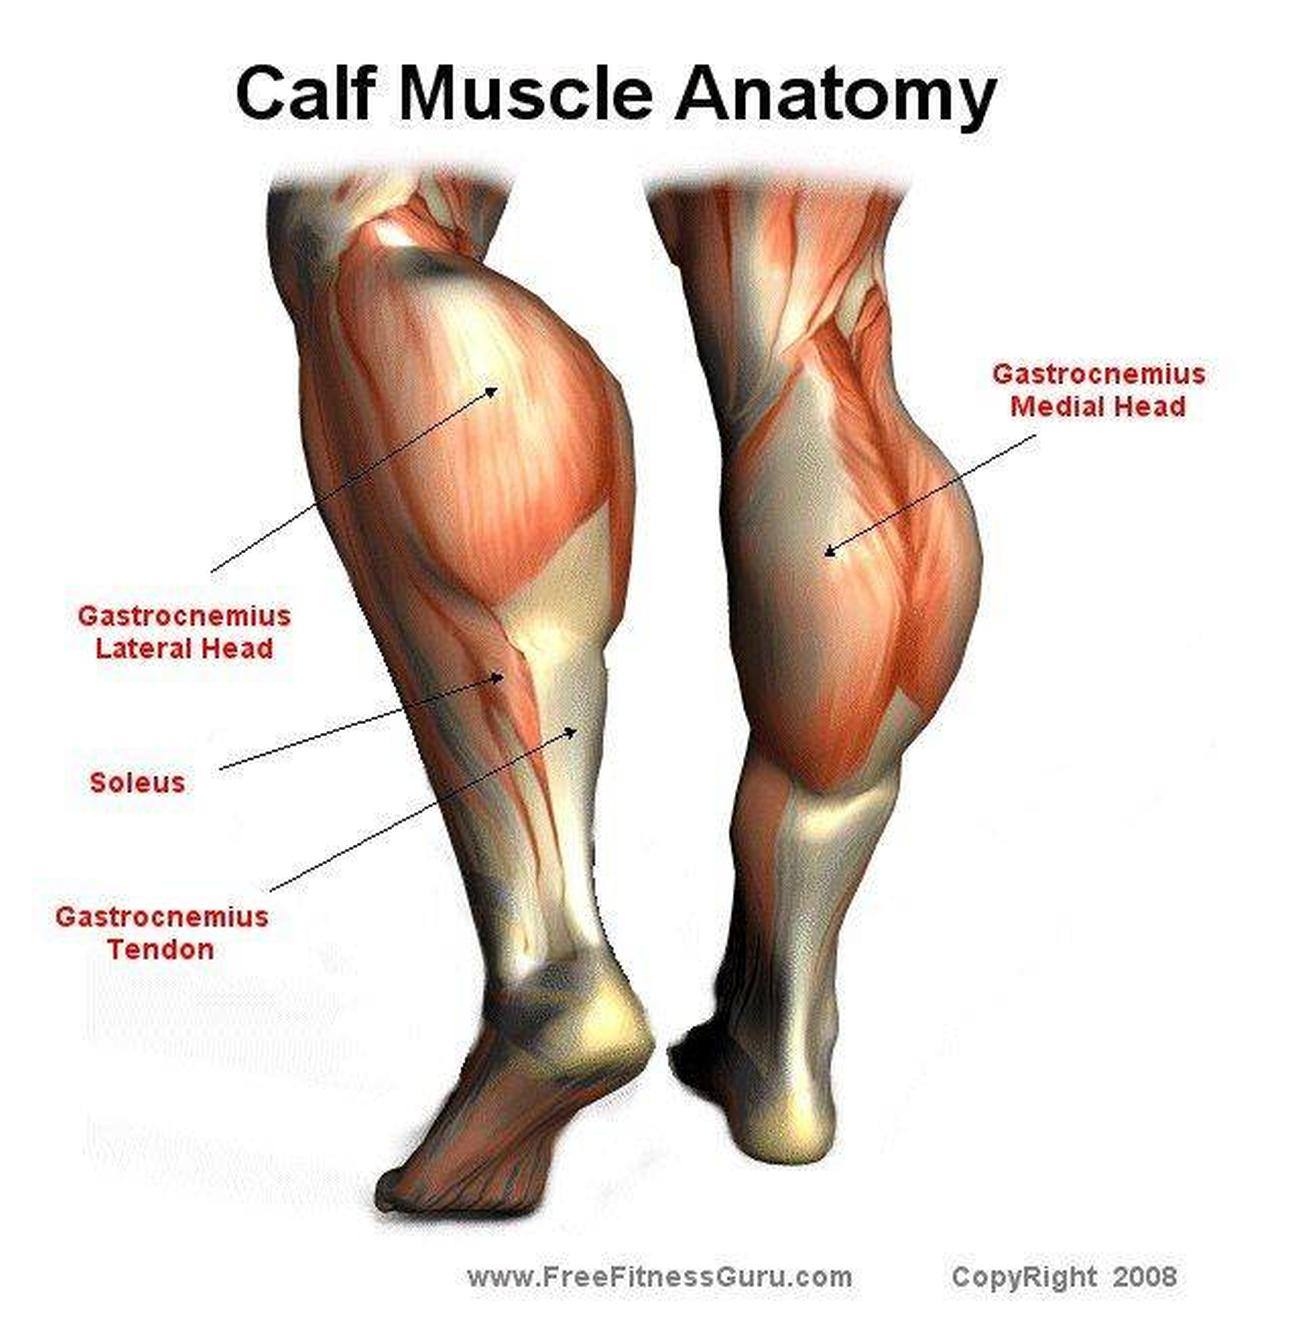 Pictures Of Calf Muscle